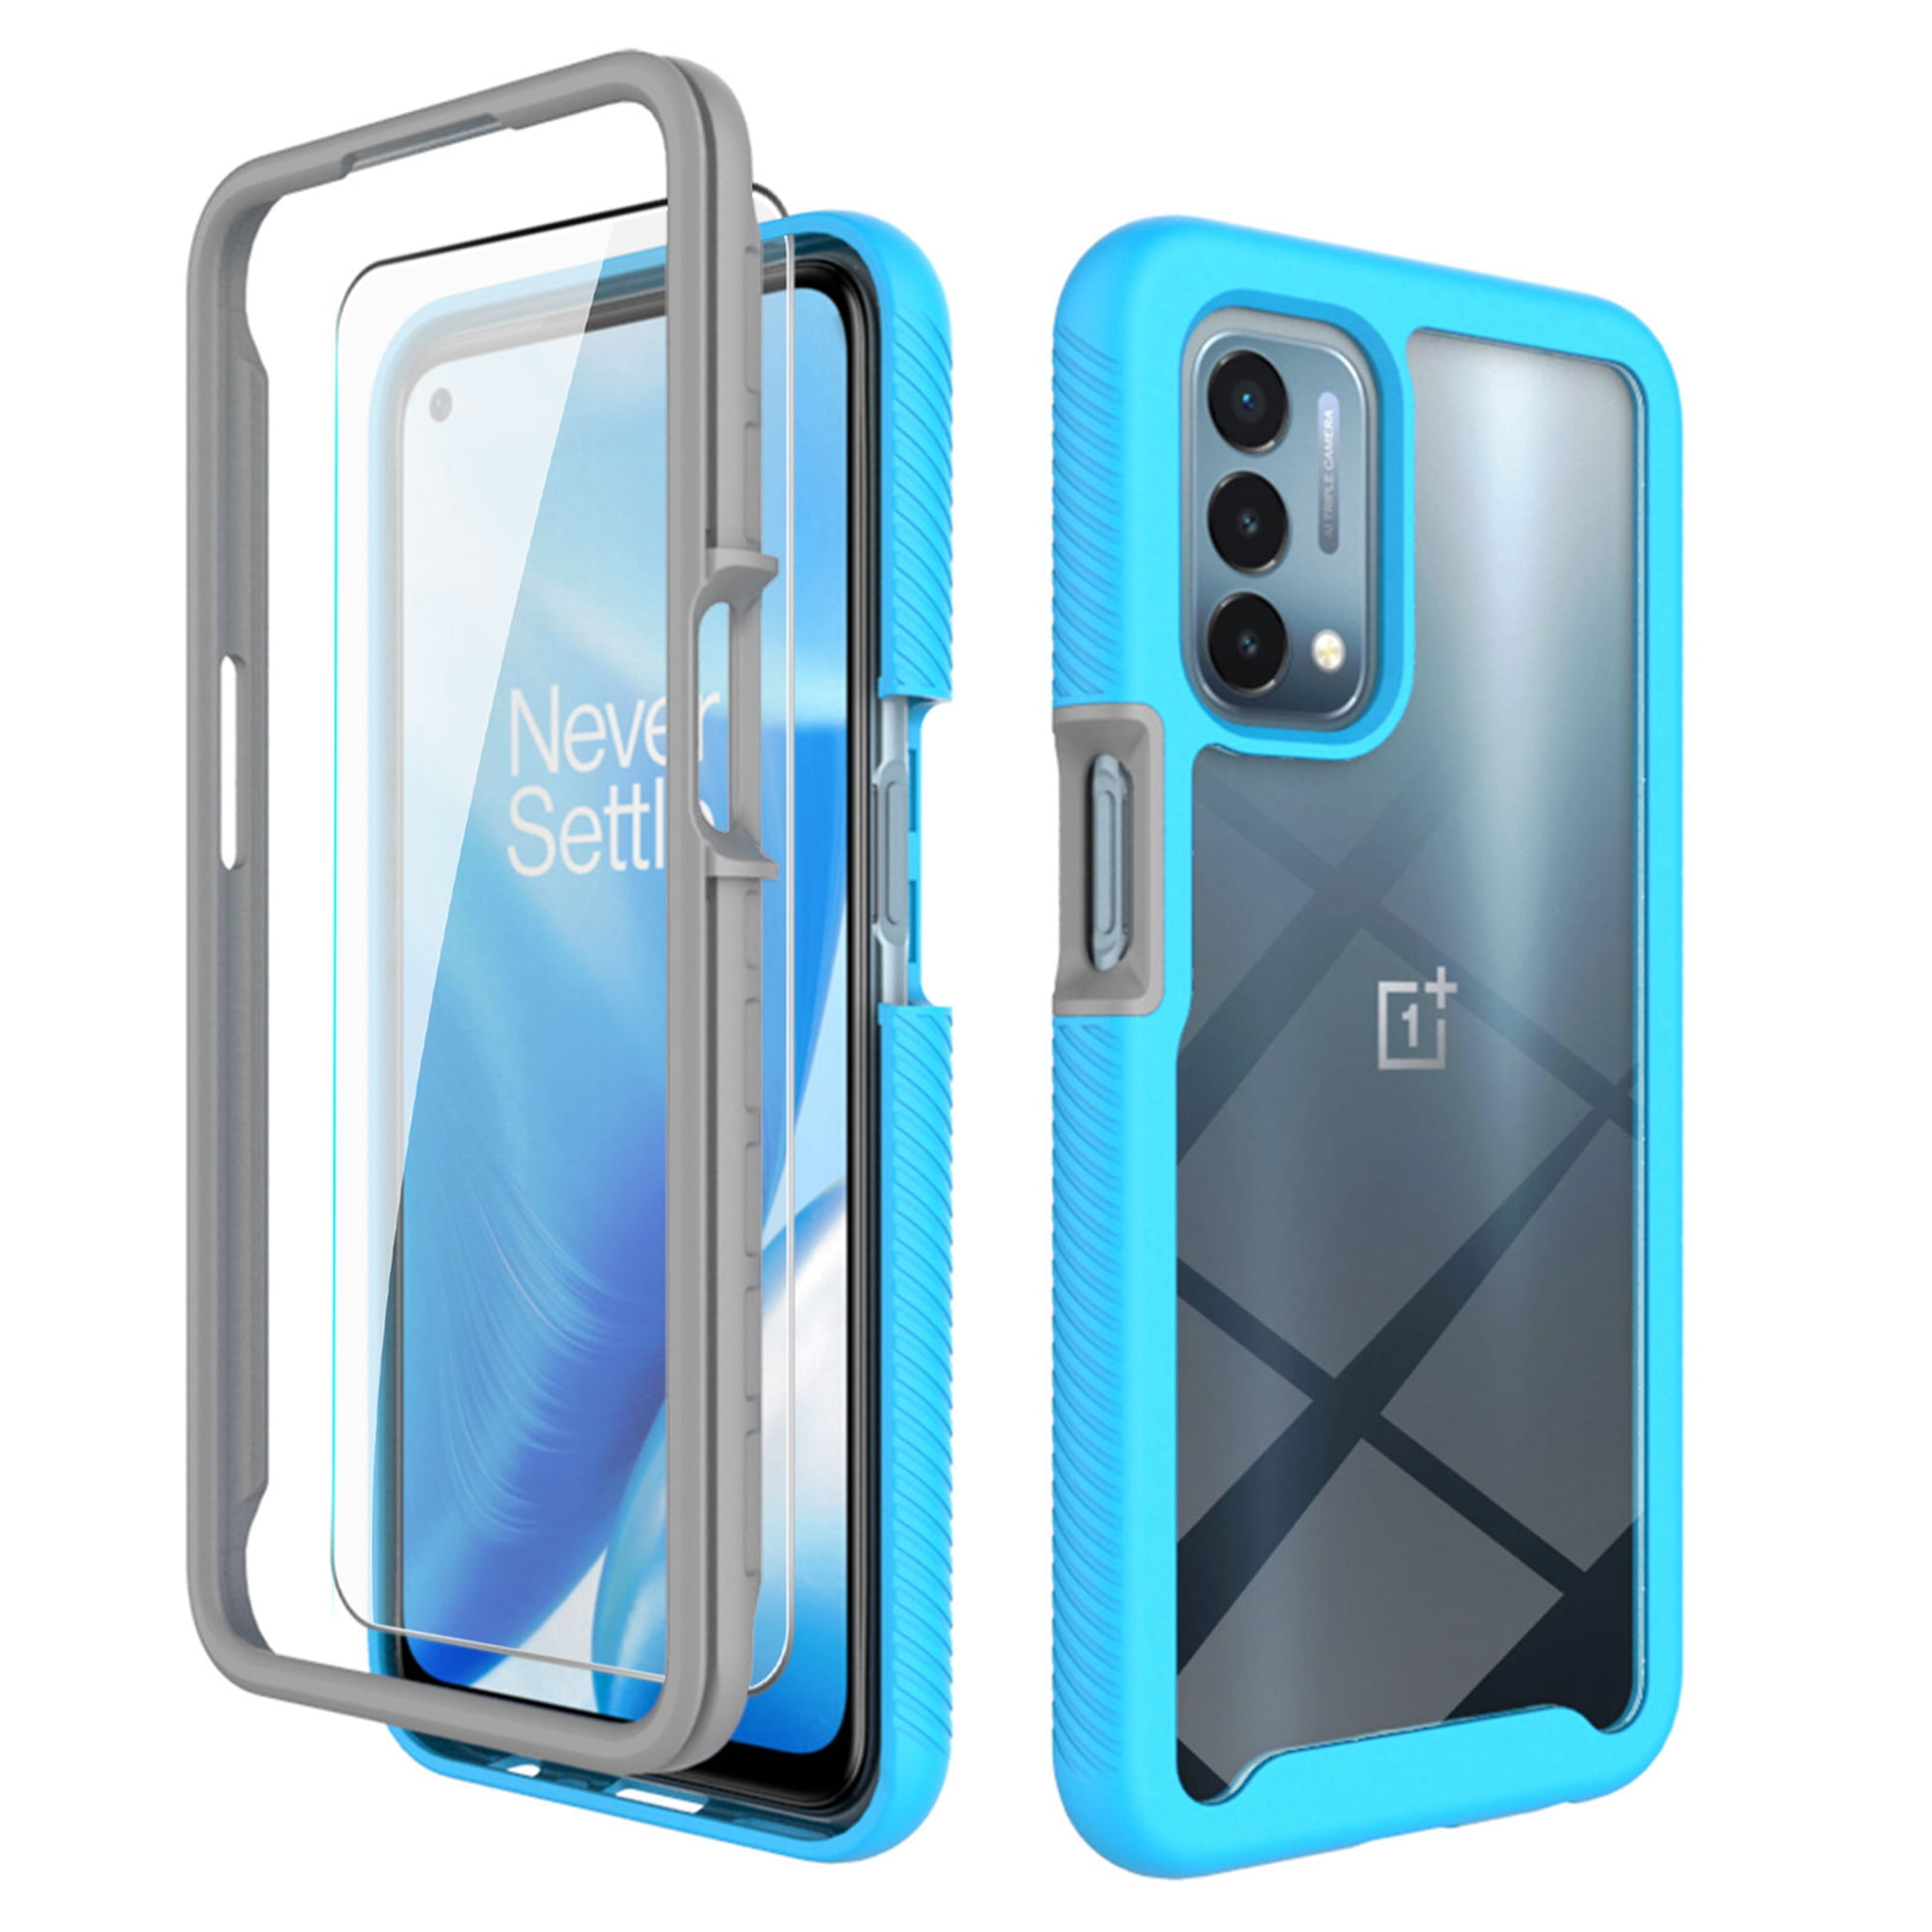 NZND OnePlus Nord N200 5G Case with Marble Design Fantasy Full-Body Protective Shockproof Rugged Bumper Cover Impact Resist Durable Phone Case Built-in Screen Protector 